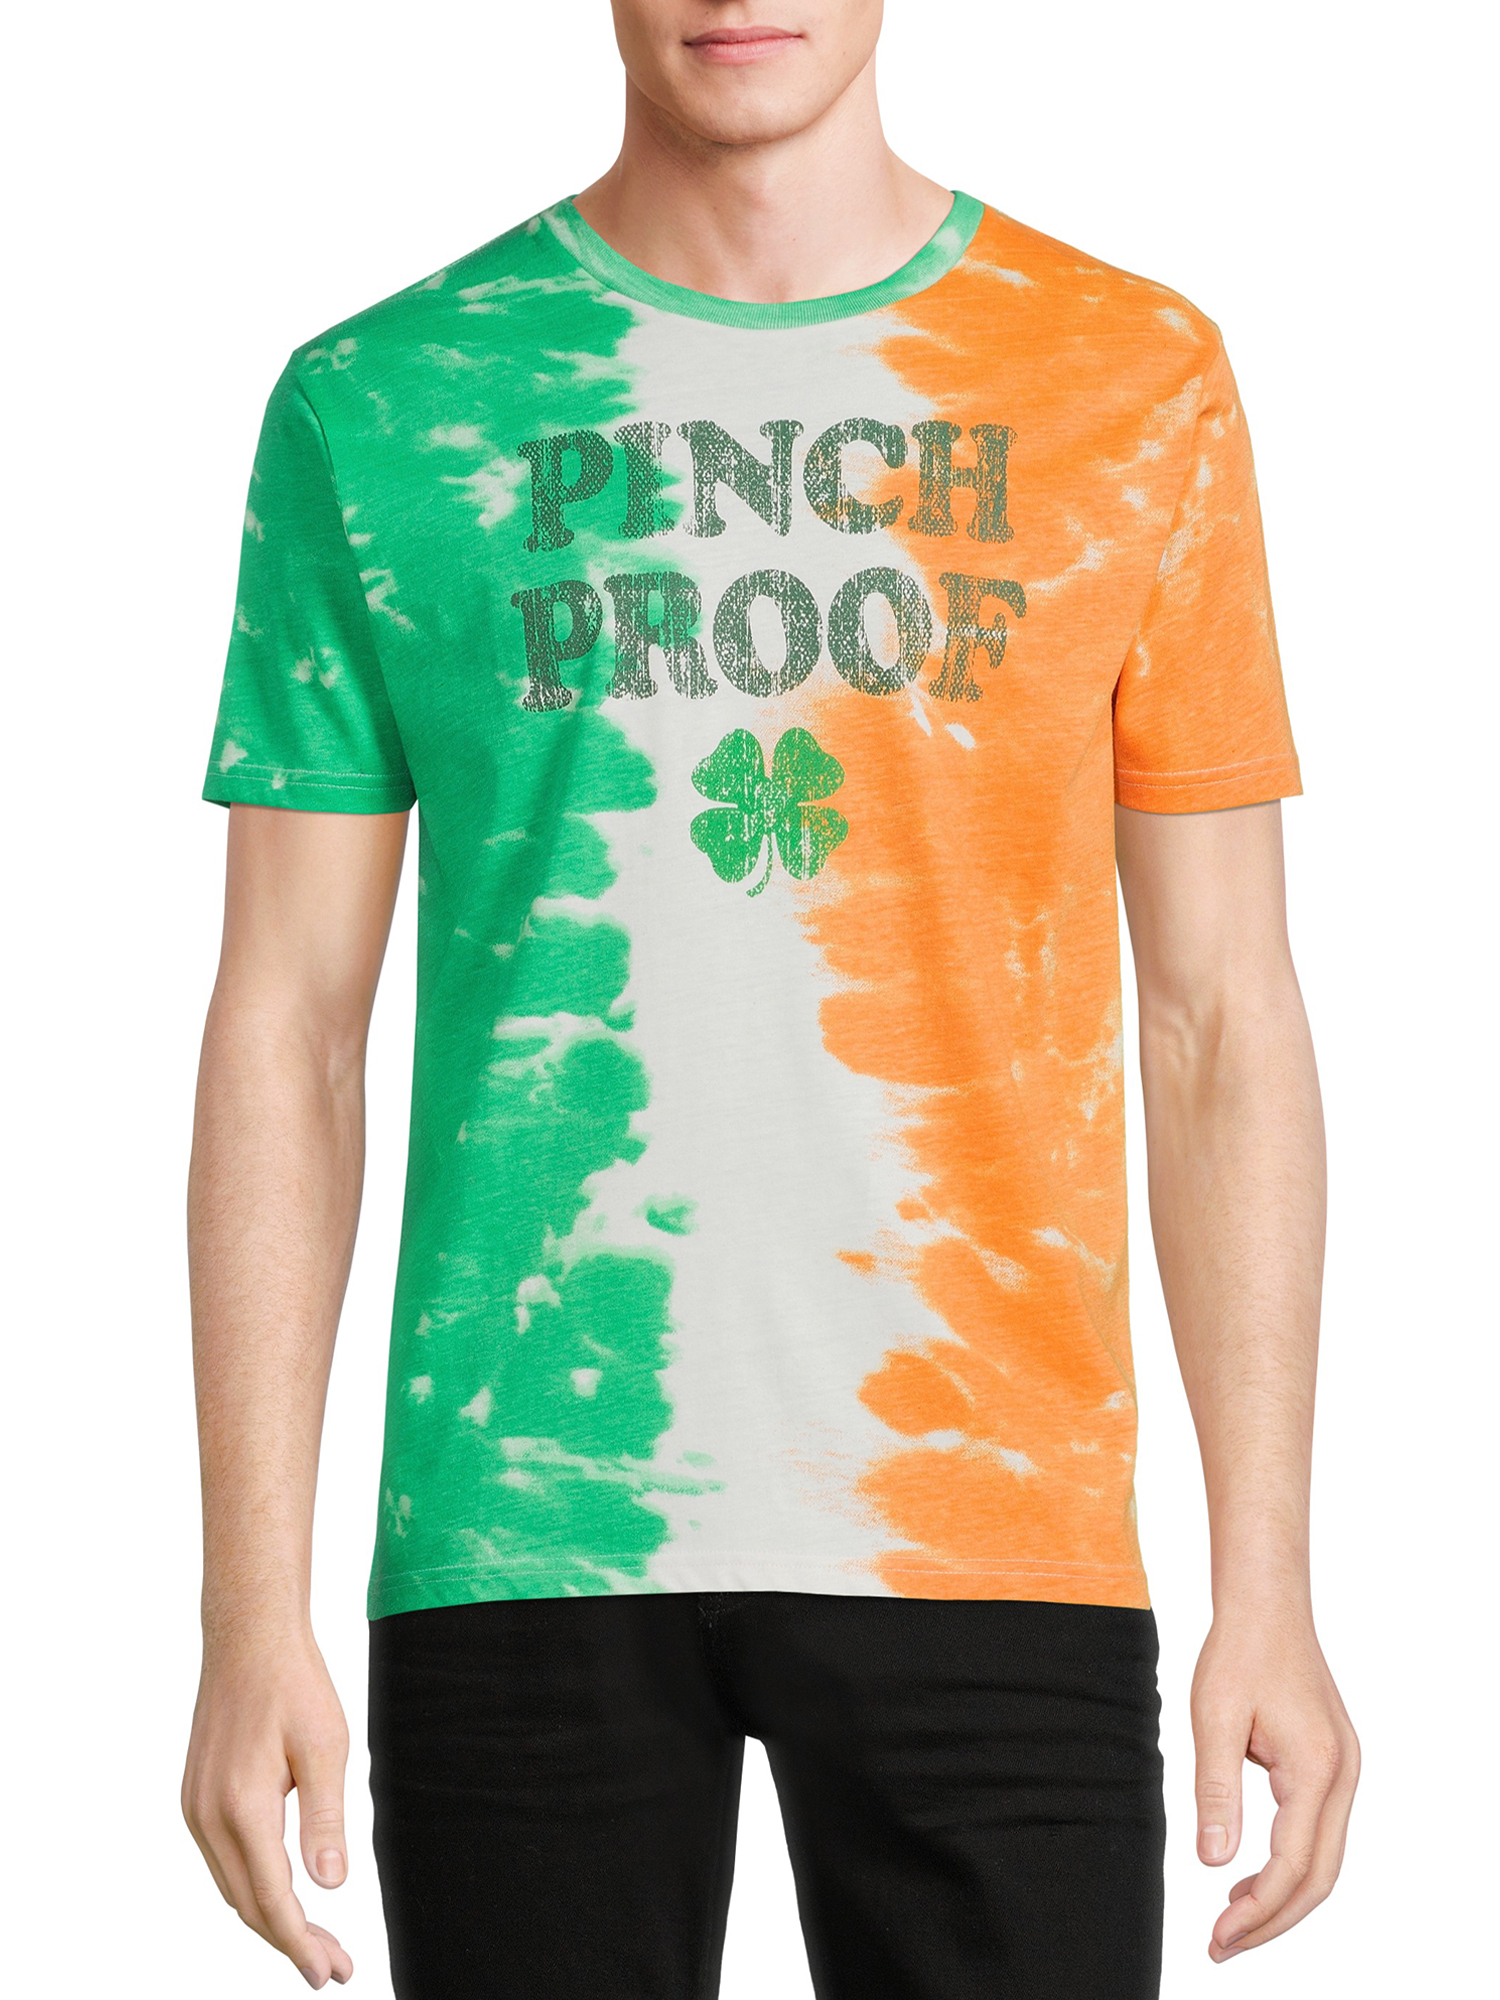 St. Patrick's Day Men's & Big Men's Life of the Paddy and Pinch Proof Graphic Tee Bundle, 2-Pack - image 3 of 6